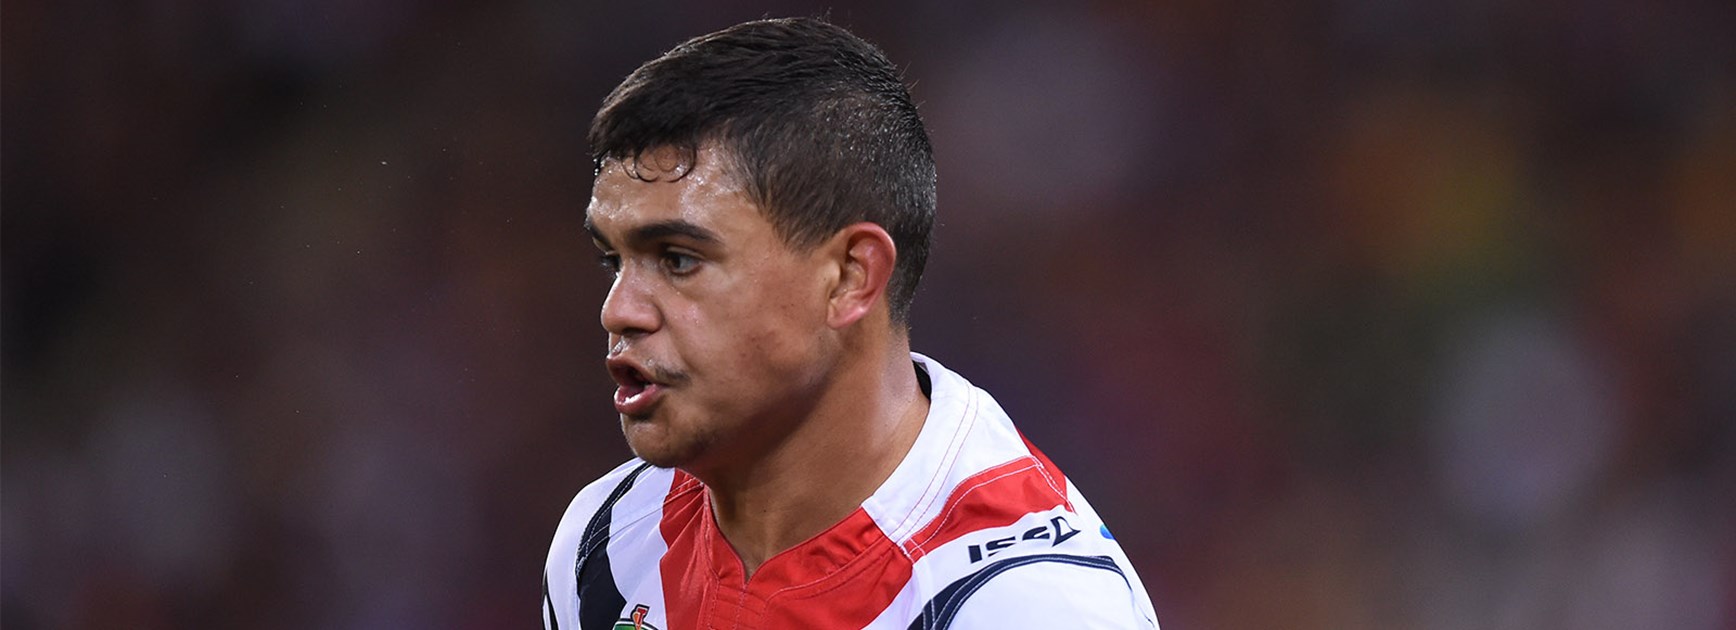 It wasn't a happy night for Latrell Mitchell against the Broncos in Round 6.